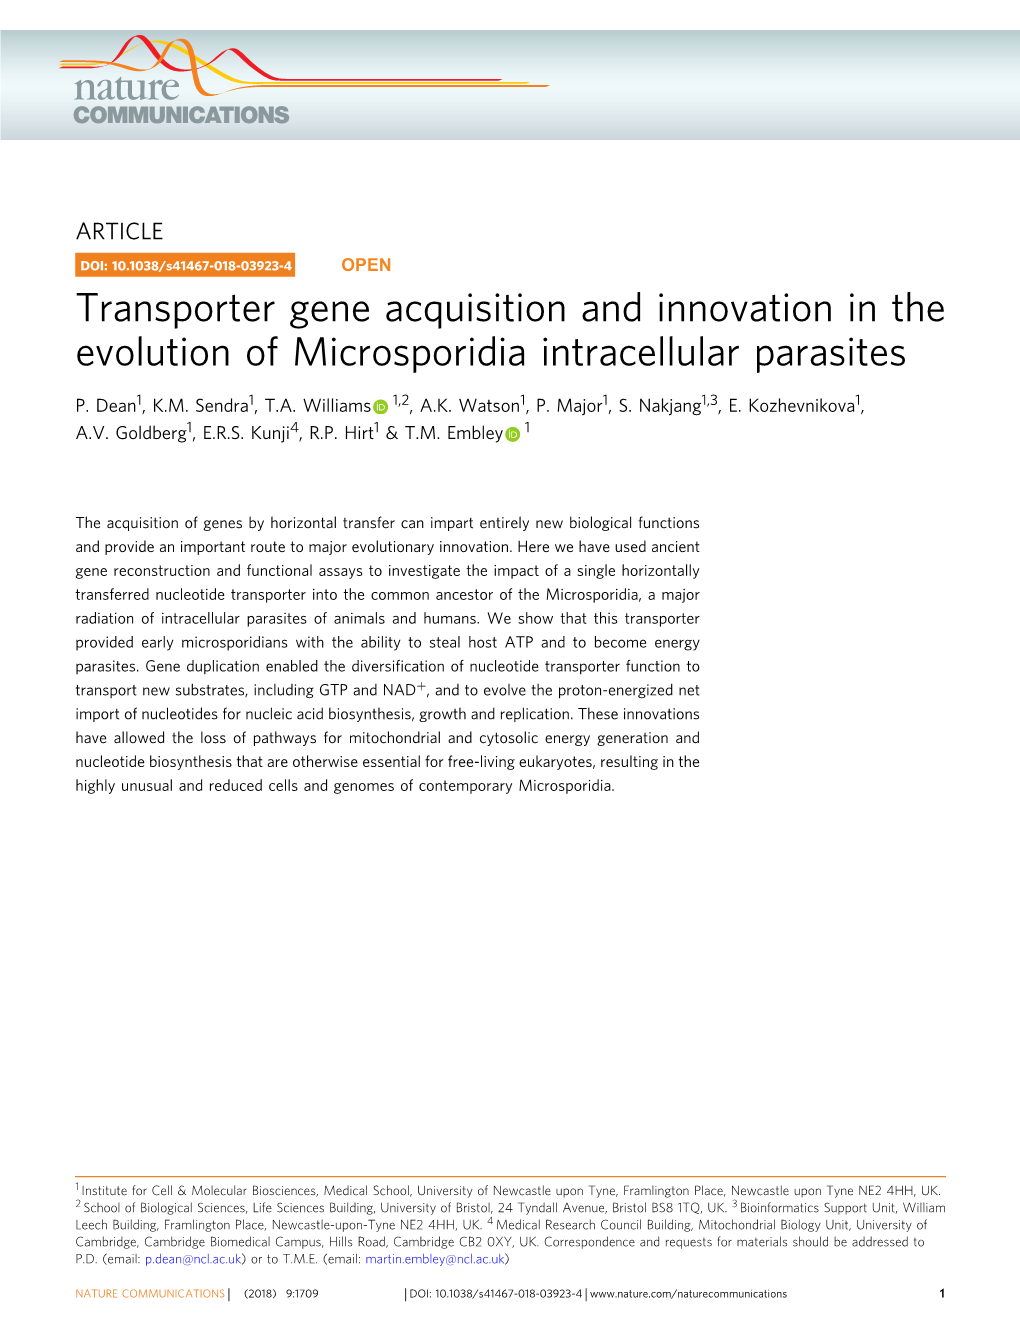 Transporter Gene Acquisition and Innovation in the Evolution of Microsporidia Intracellular Parasites